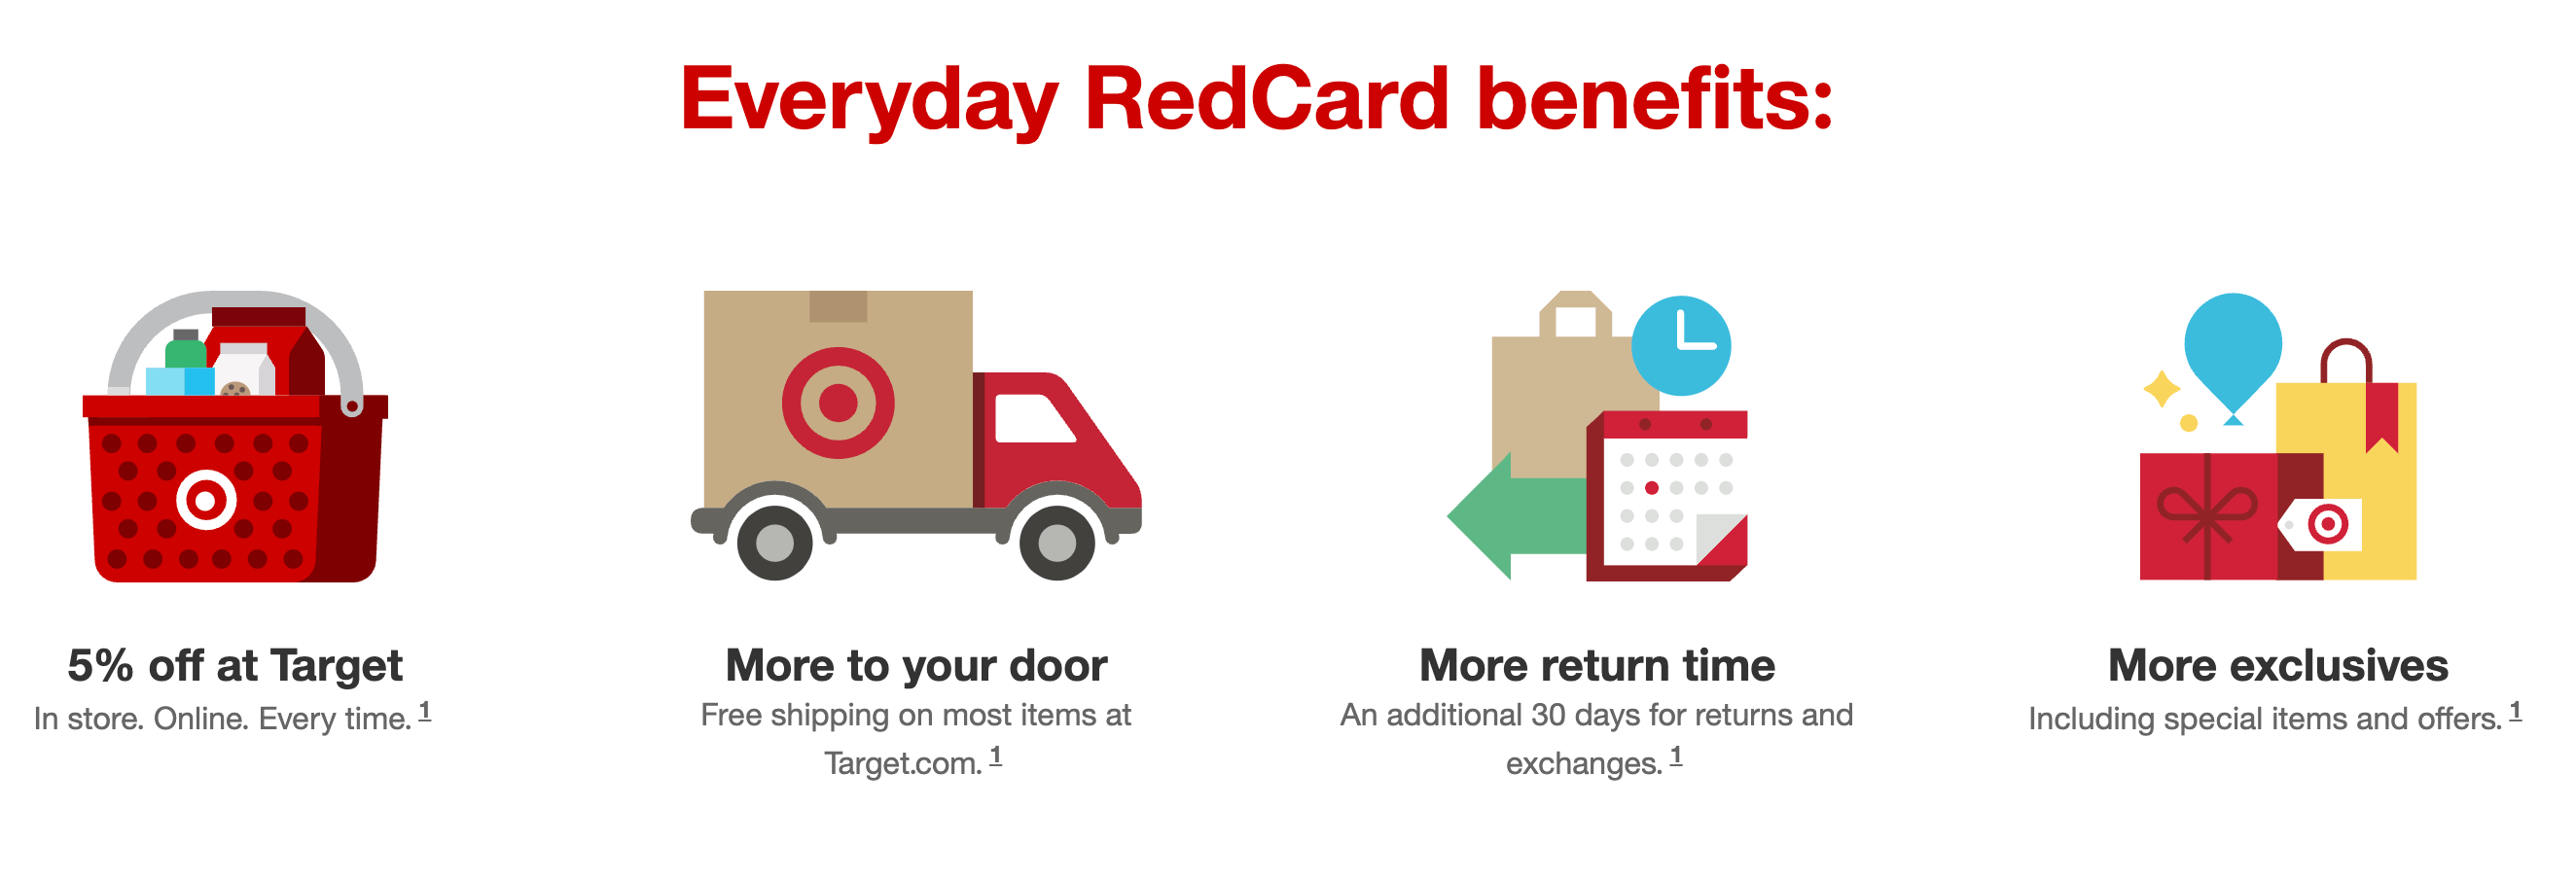 A screenshot of Target RedCard’s benefits from its explainer page. Everyday RedCard benefits: 5% off at Target (In store. Online. Every time.), more to your door (free shipping on most items at Target.com), more return time (an additional 30 days for returns and exchanges), and more exclusives (including special items and offers). There are representative branded icons above each benefit description. 